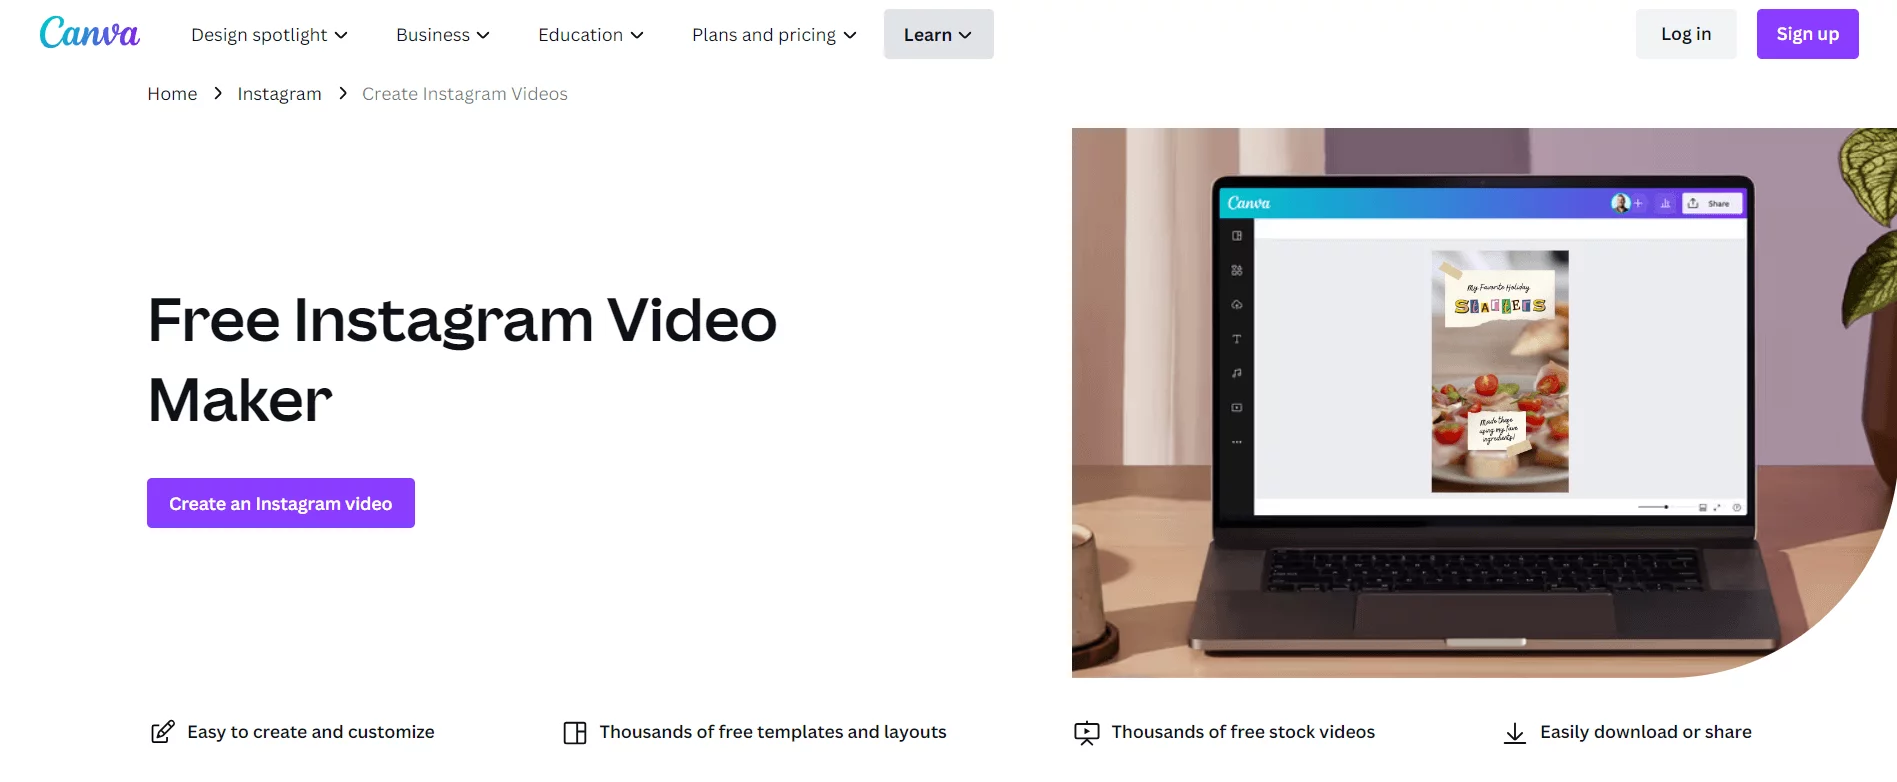 Canva's webpage promoting their Free Instagram Video Maker, showcasing a laptop displaying an Instagram video editing interface.